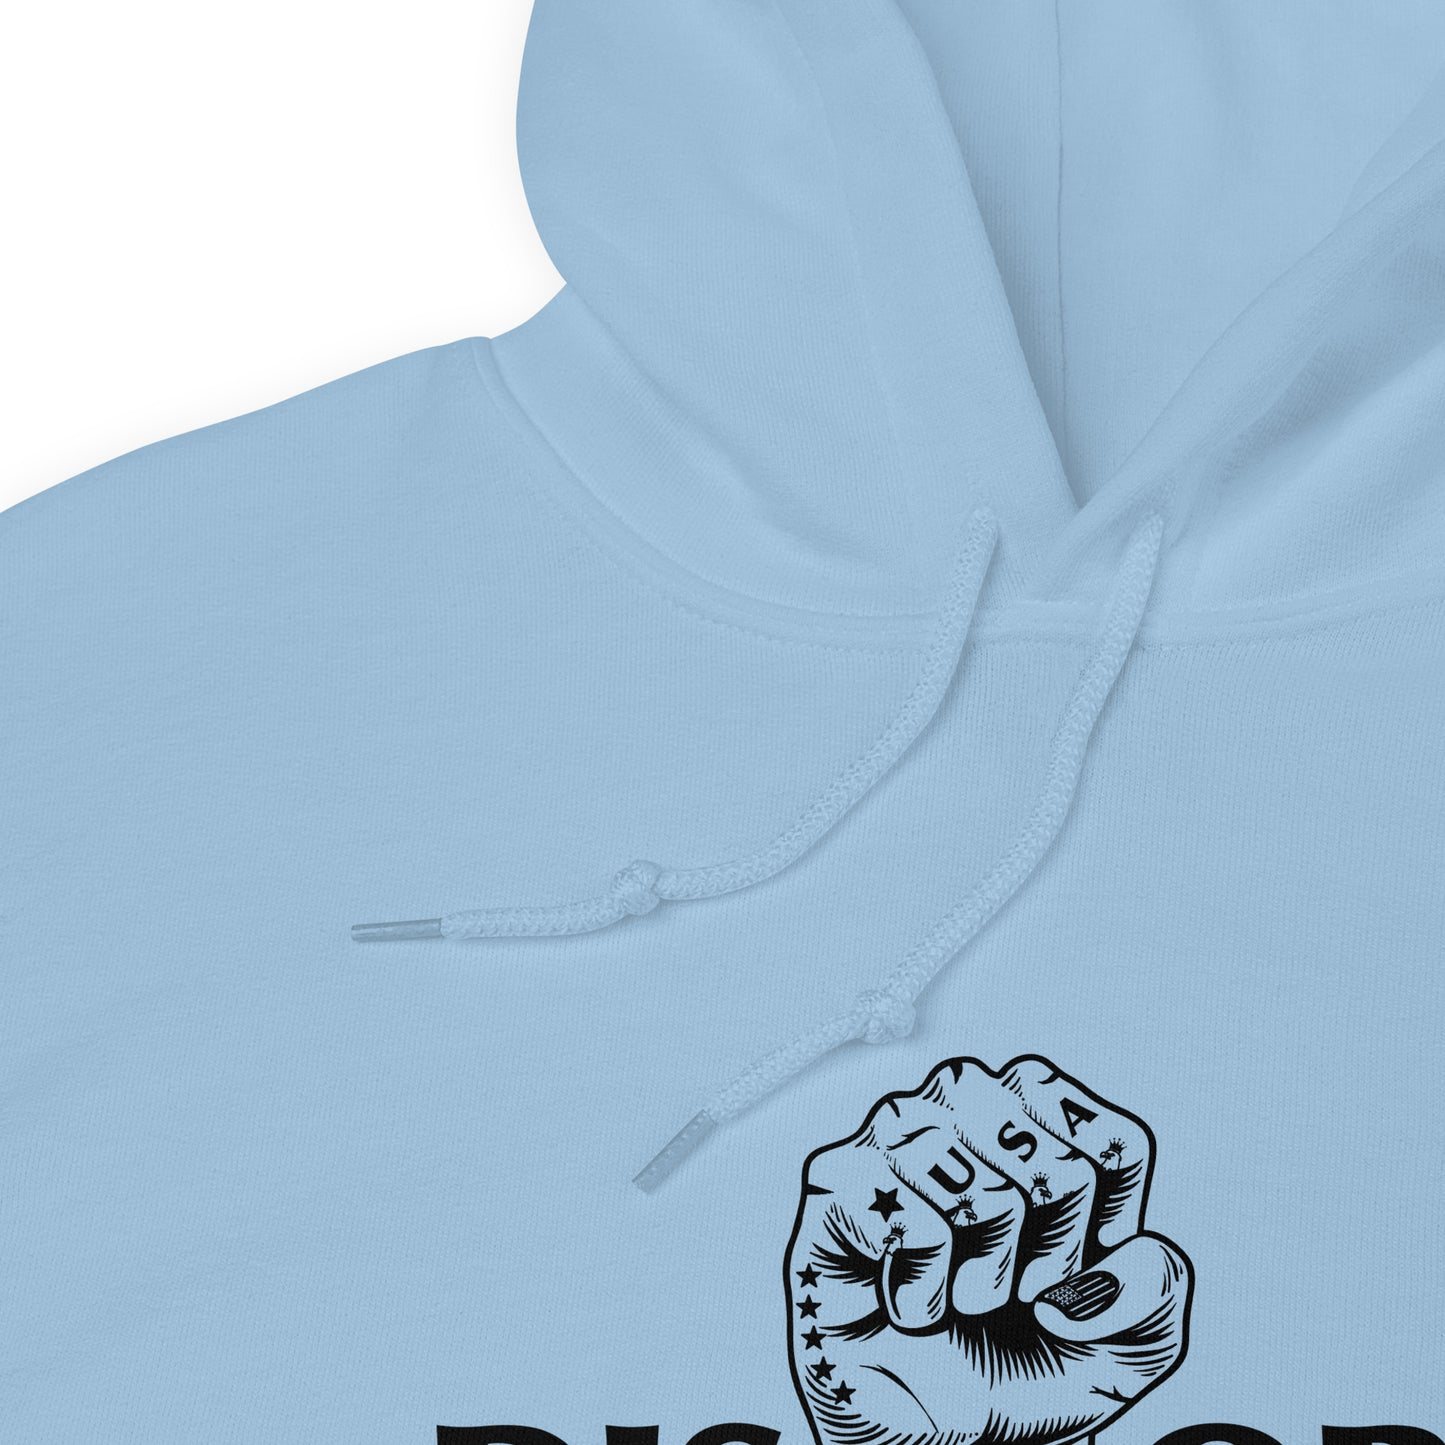 DiSobey Fake&Fear<br>(Battle Edition) Hoodie